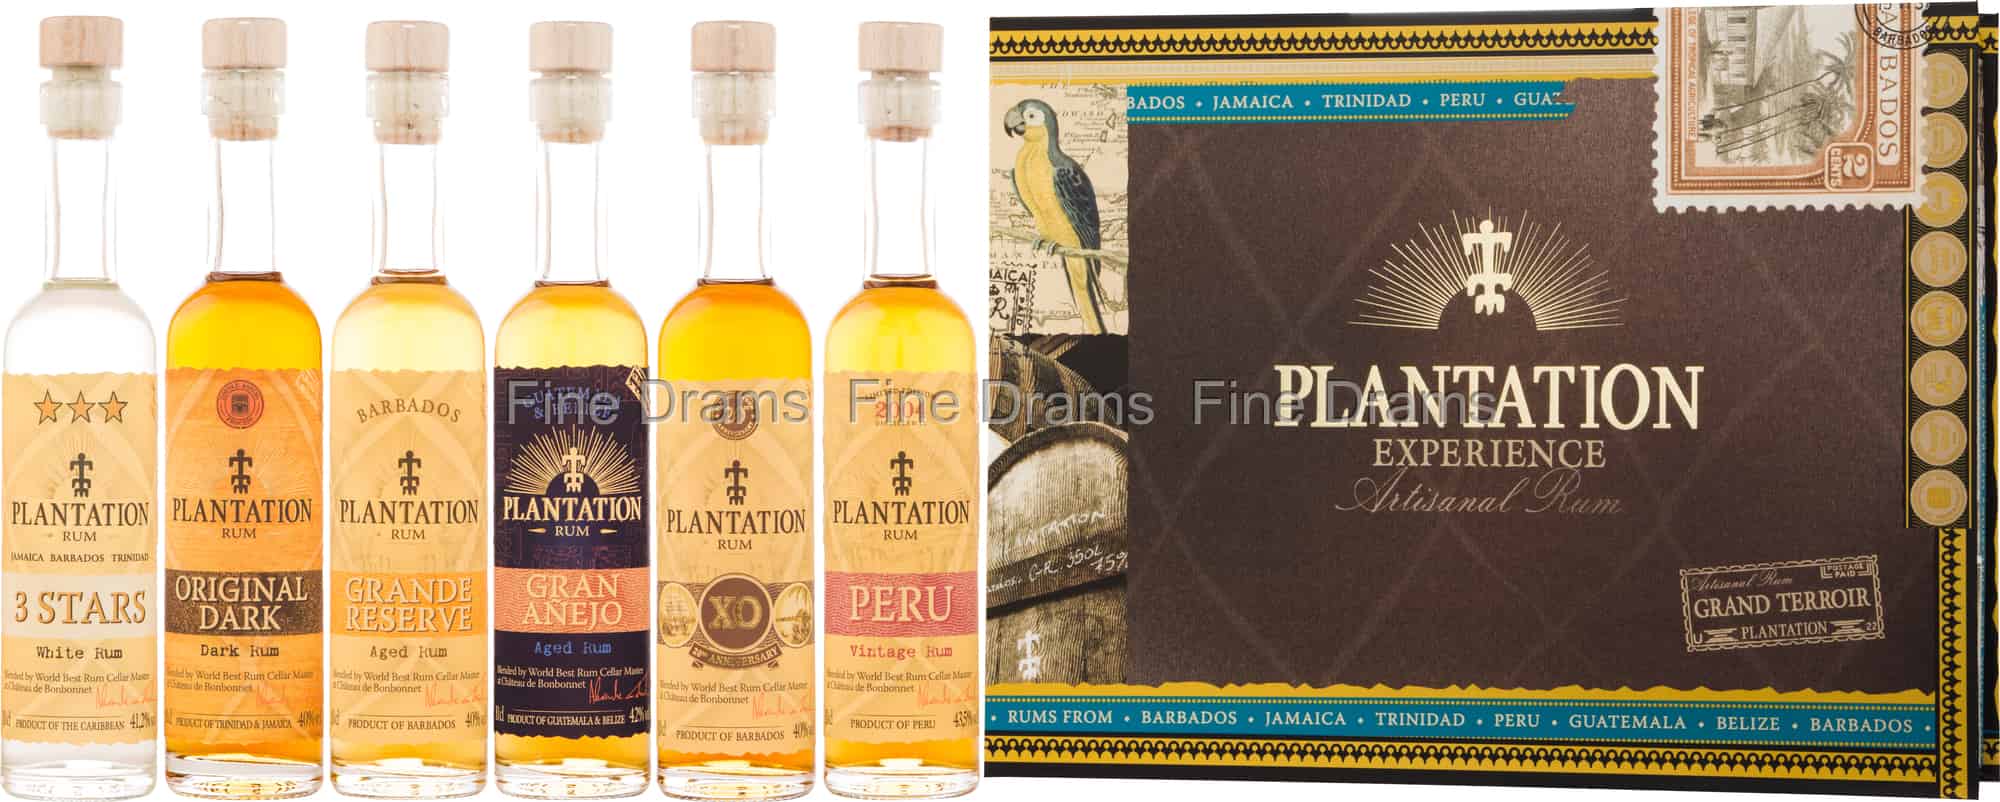 Plantation Rum Experience Gift Pack x 10 6 - cl